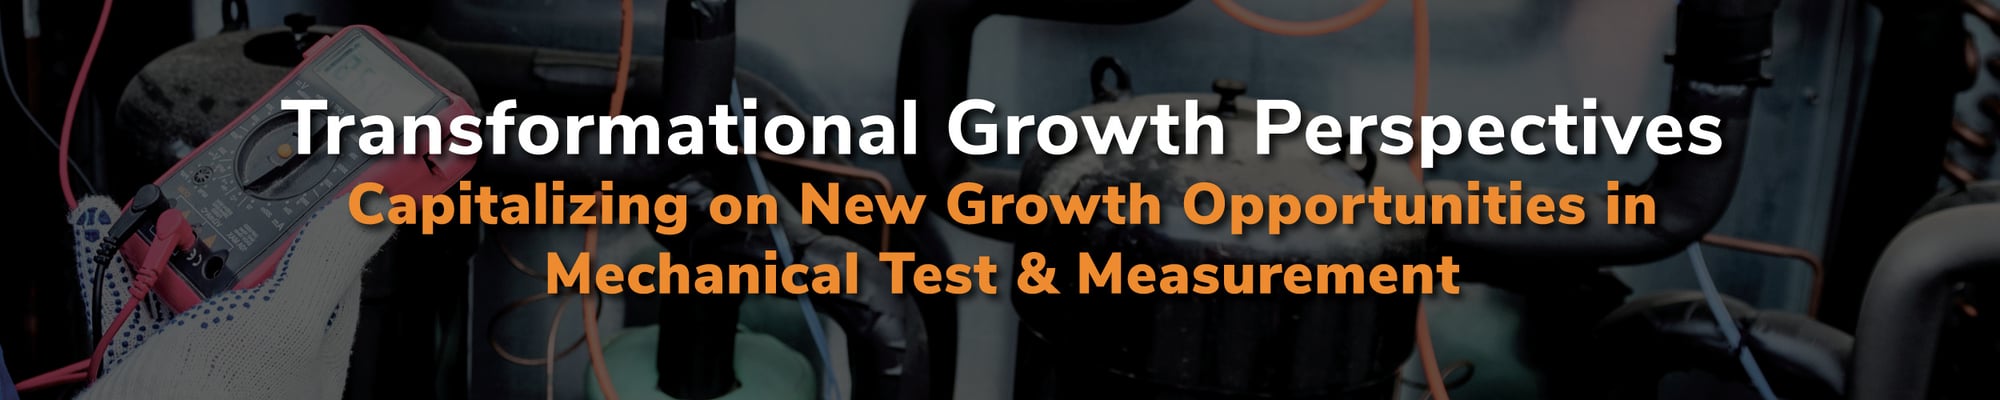 Transformational Growth Perspectives in Mechanical Test & Measurement